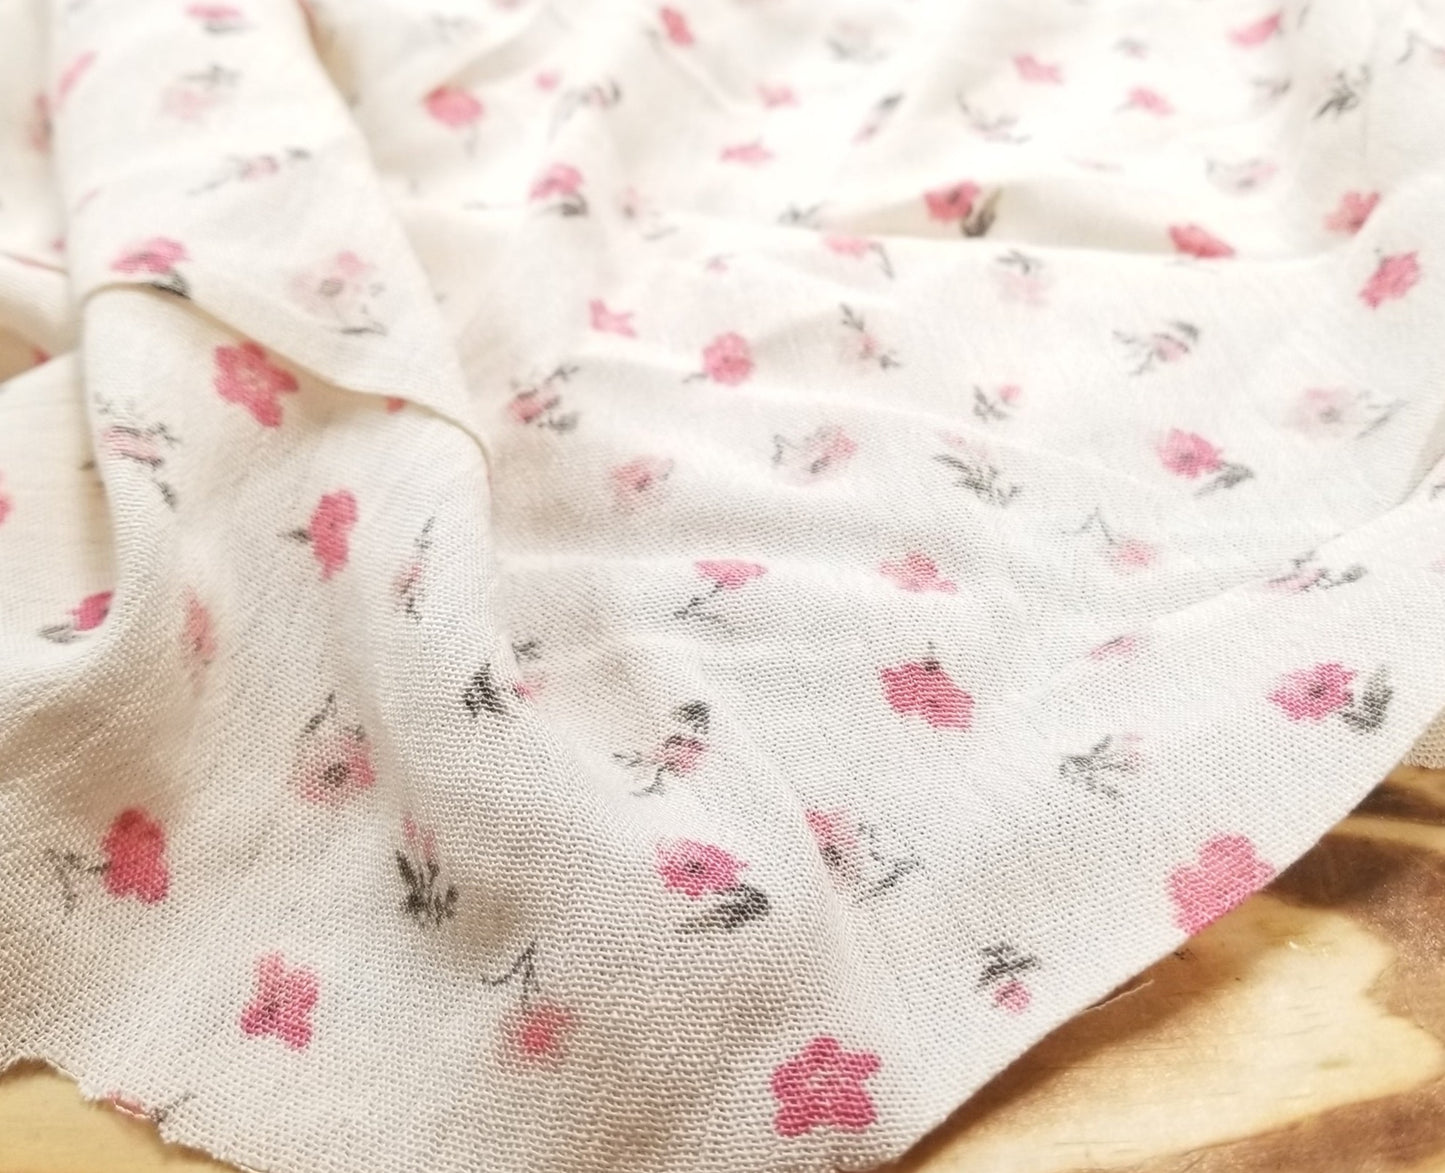 Designer Deadstock Rayon Crinkle Gauze Cream Pink Cottage Ditsy Floral Woven- Sold by the yard